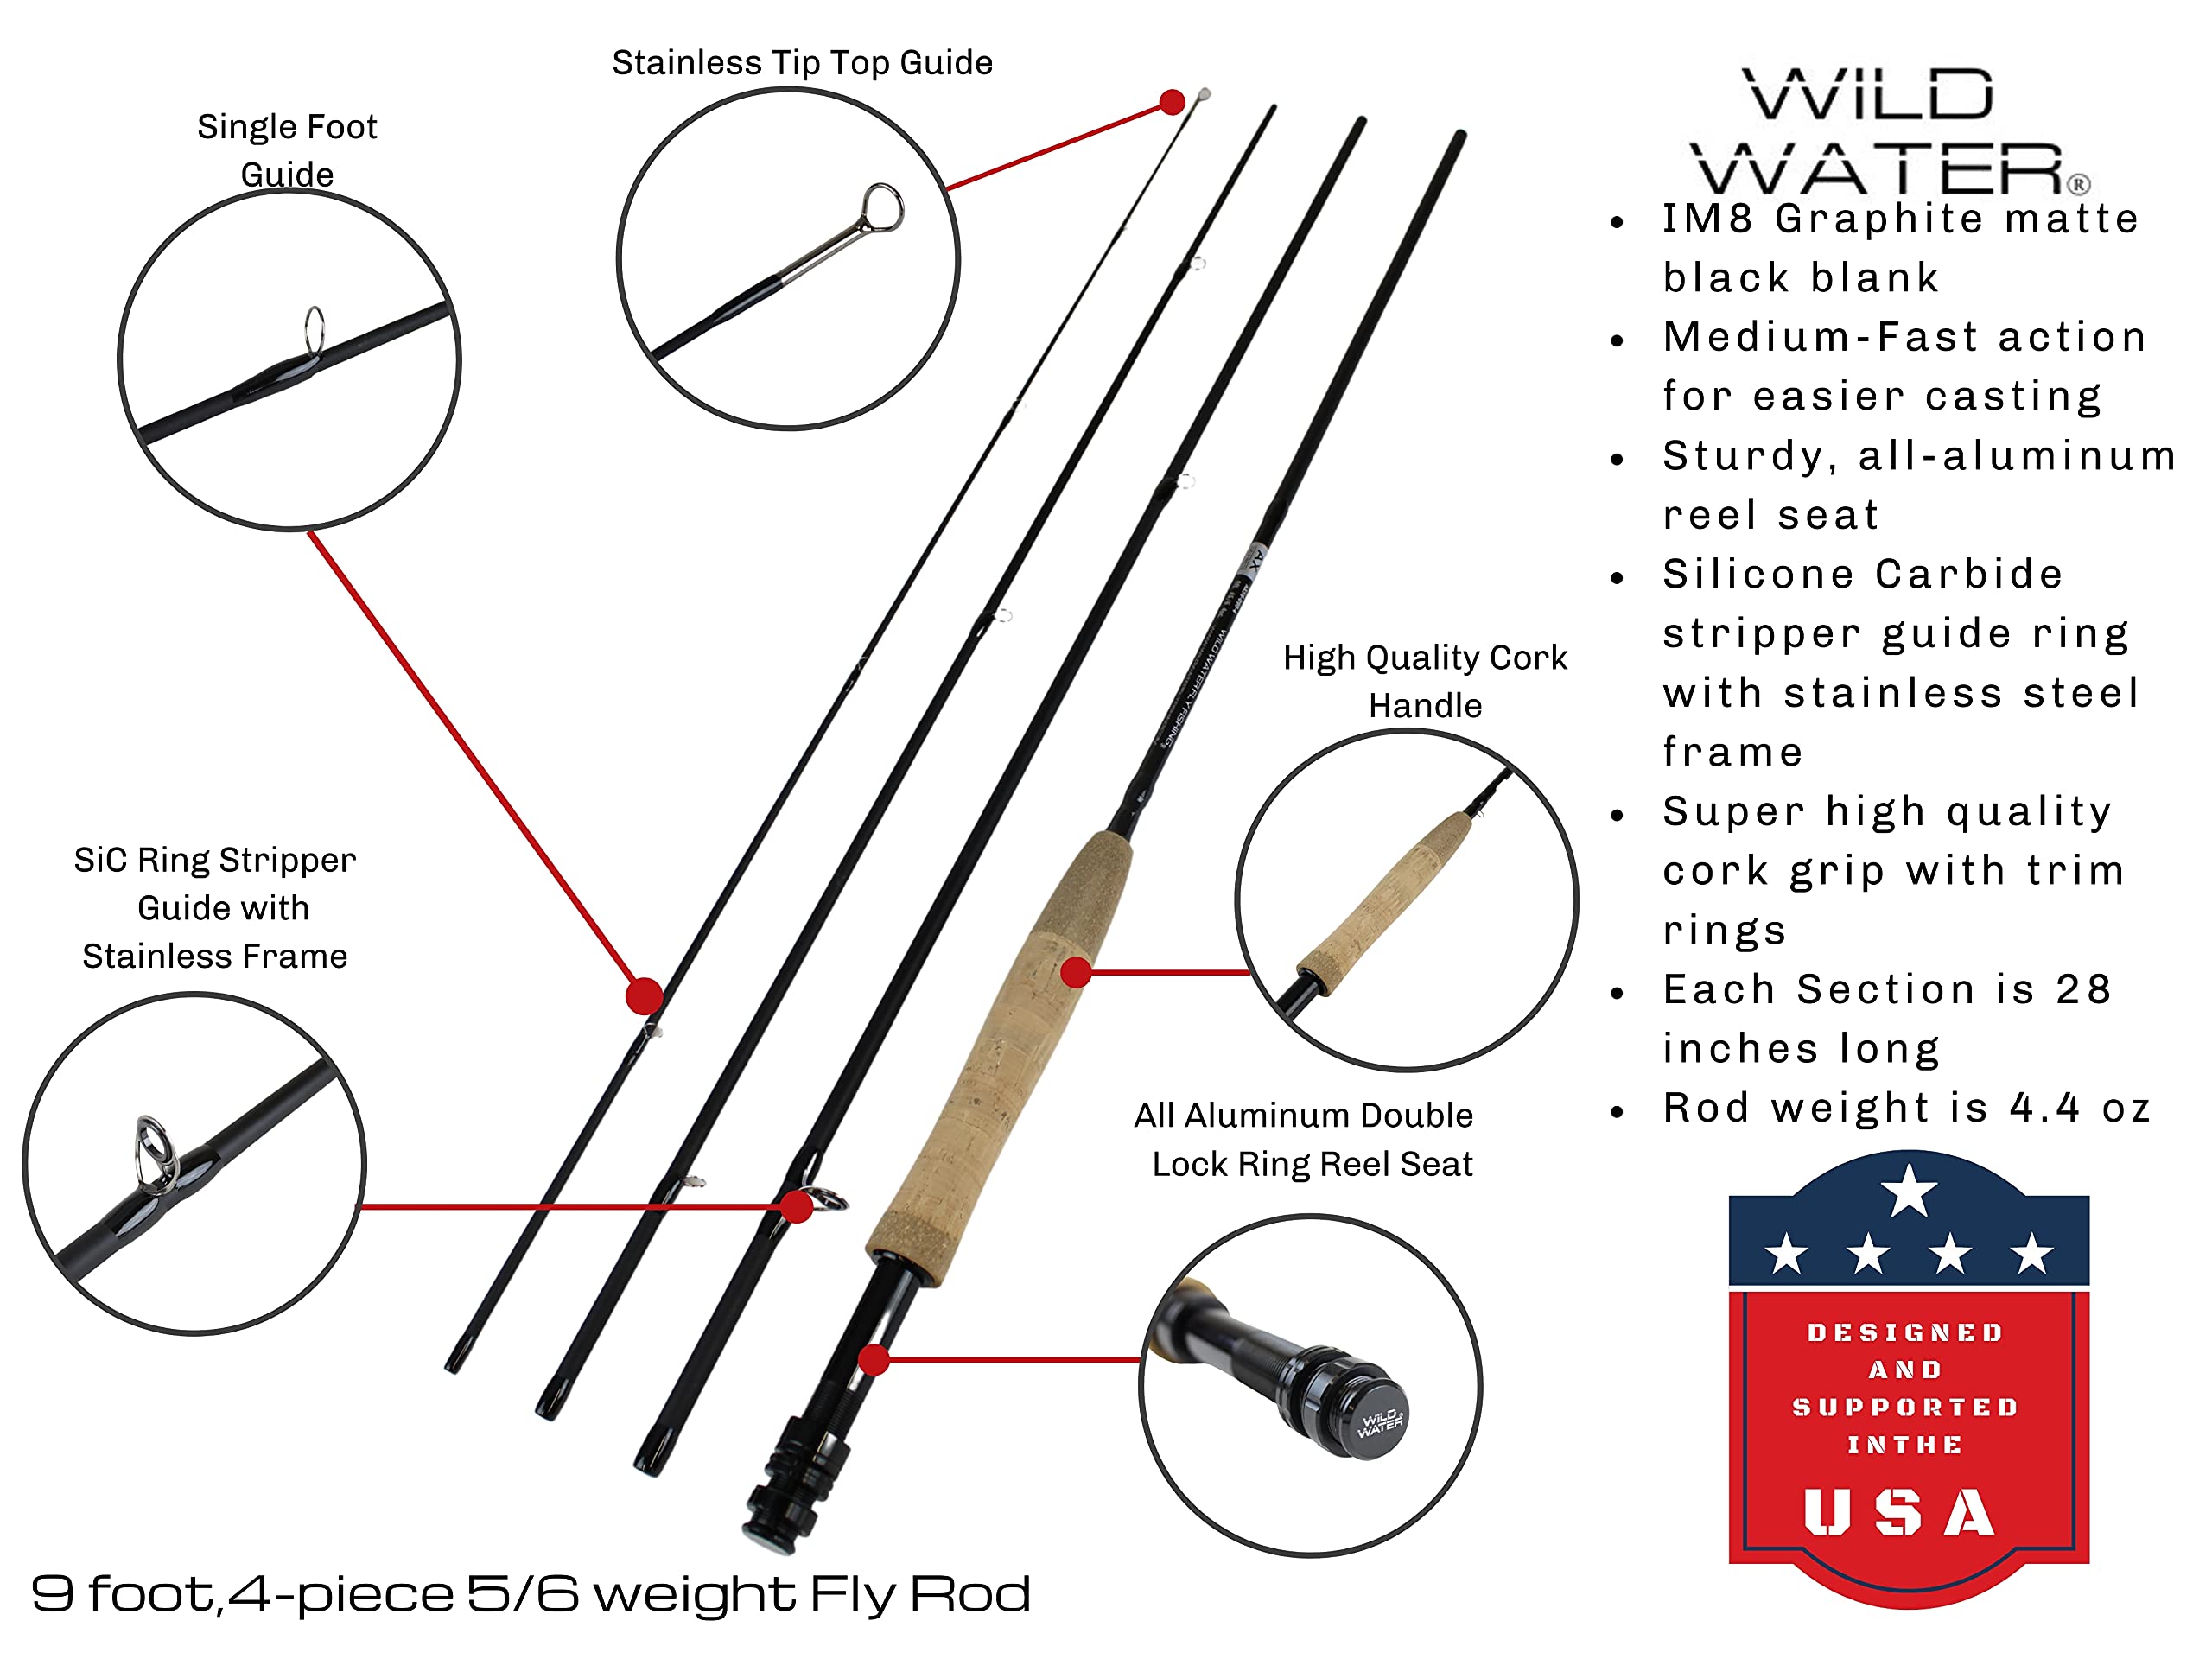 Wild Water Fly Fishing Rod - 9 Foot - Durable IM8 Graphite - High